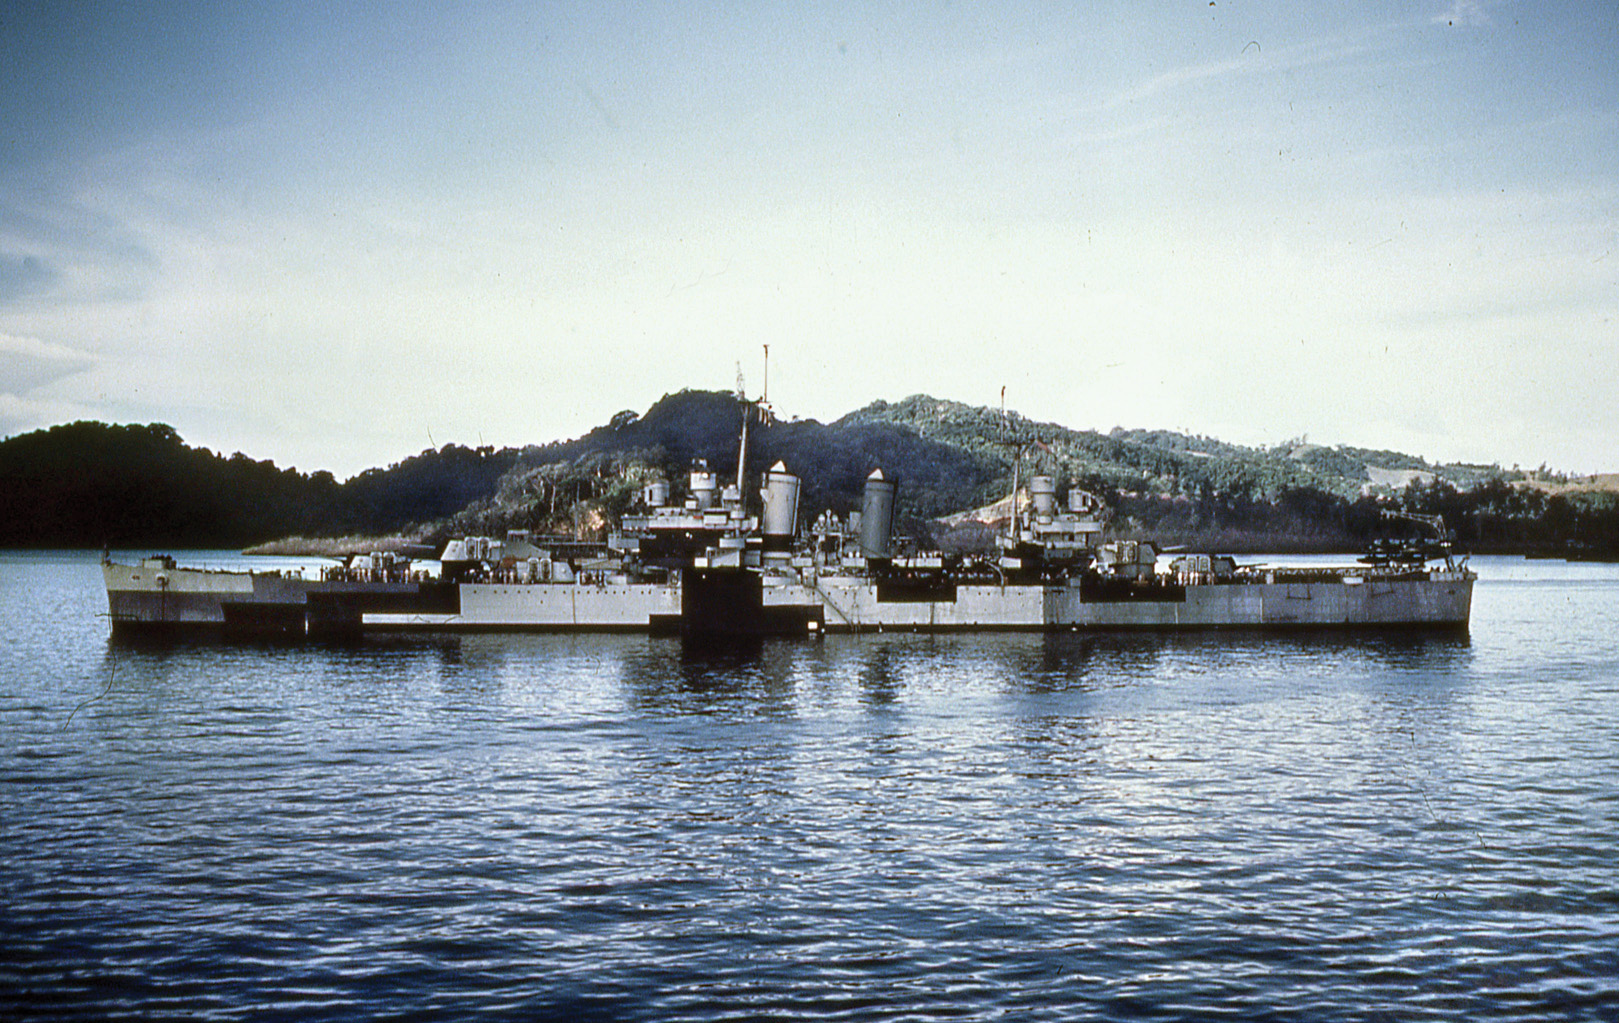 The USS St. Louis was painted in Measure 32 camouflage. 